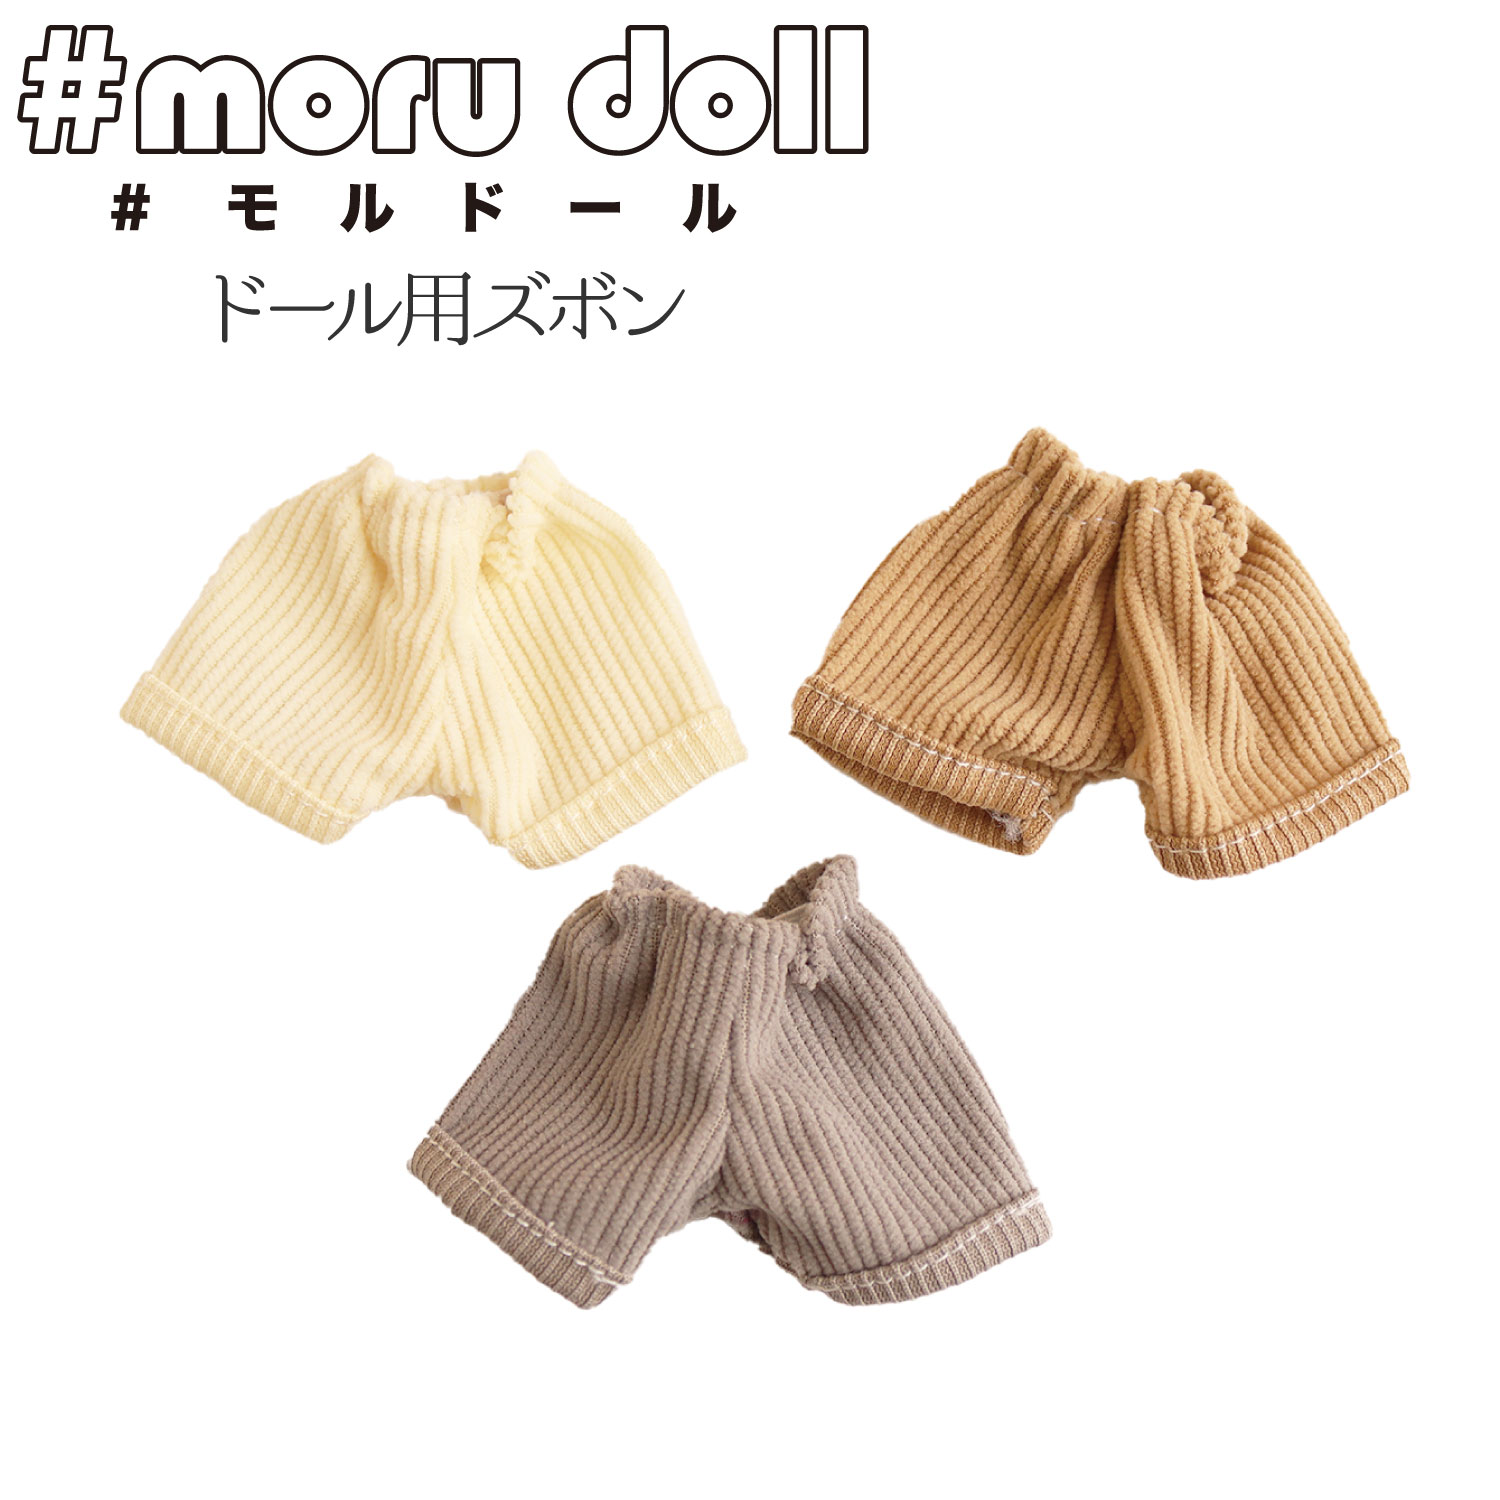 MOL Molle Doll Korean Goods Molle Pants Molle Doll Accessories (bag)